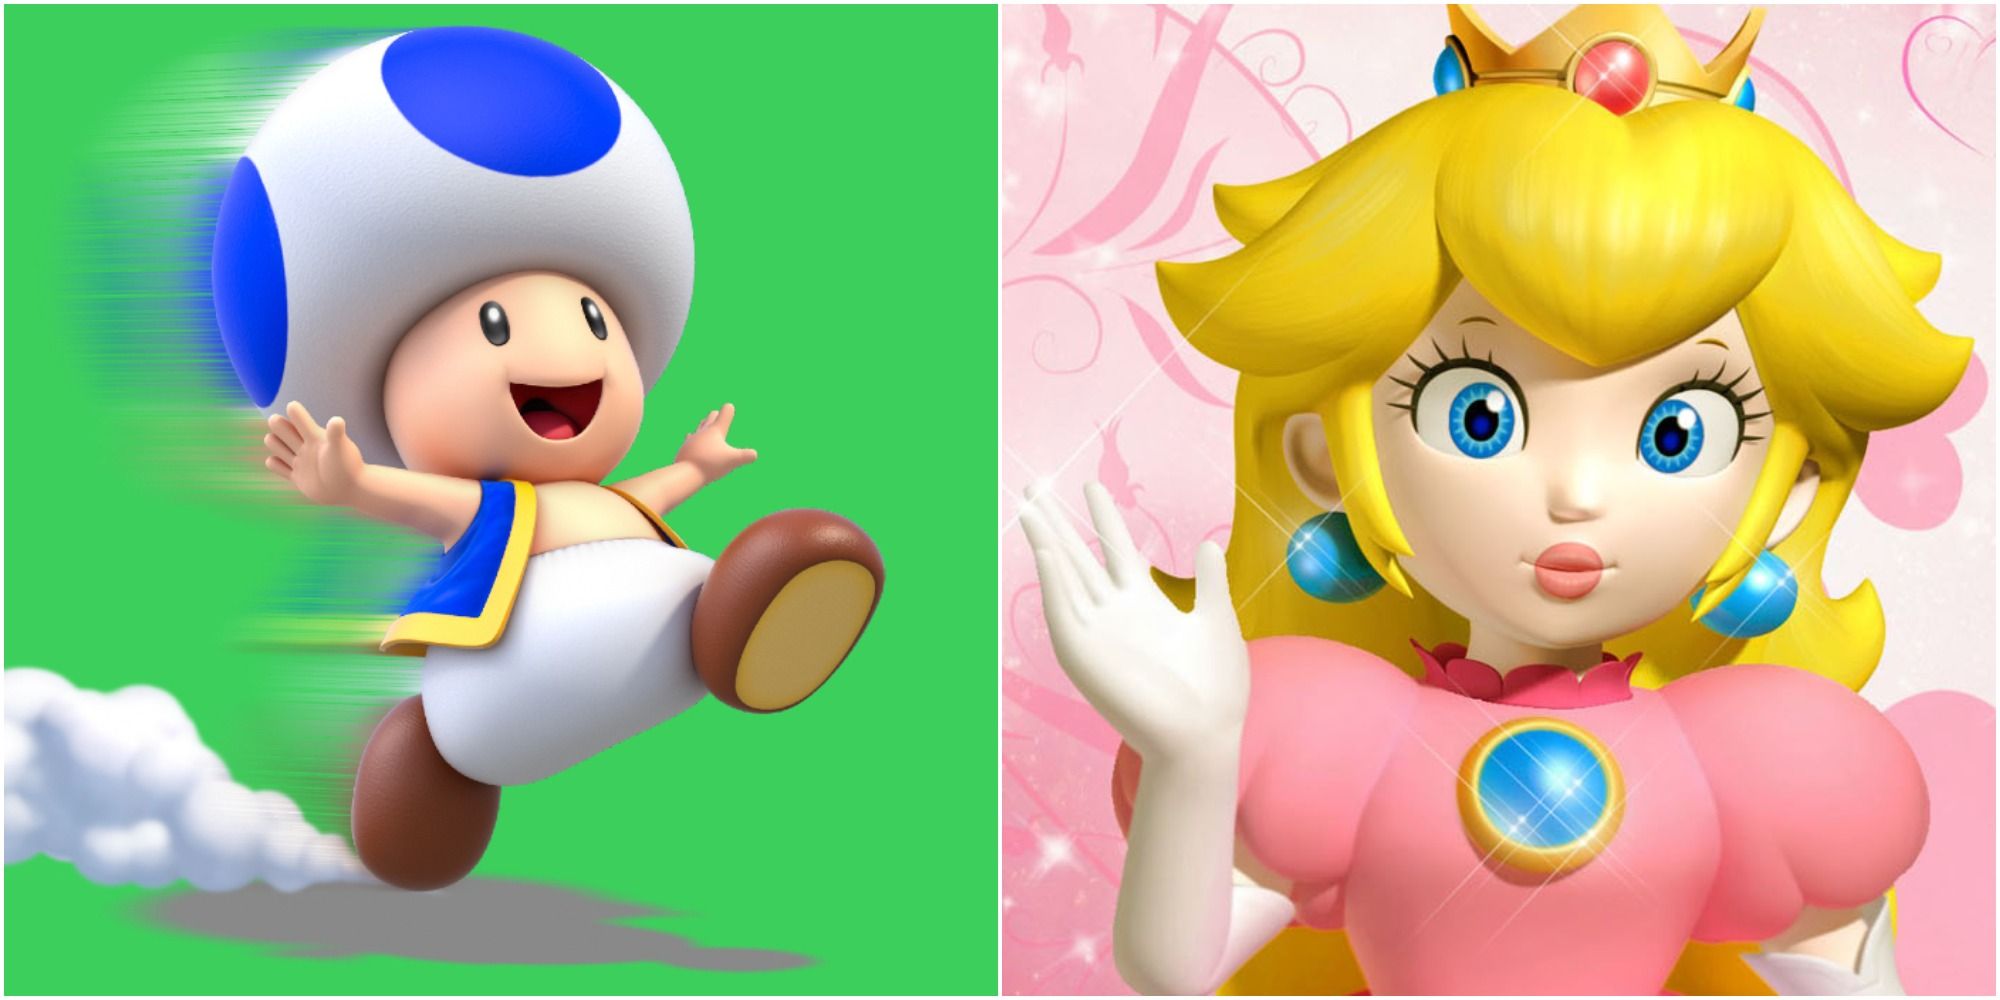 What Are the Differences Between Characters in 'Super Mario 3D World'?